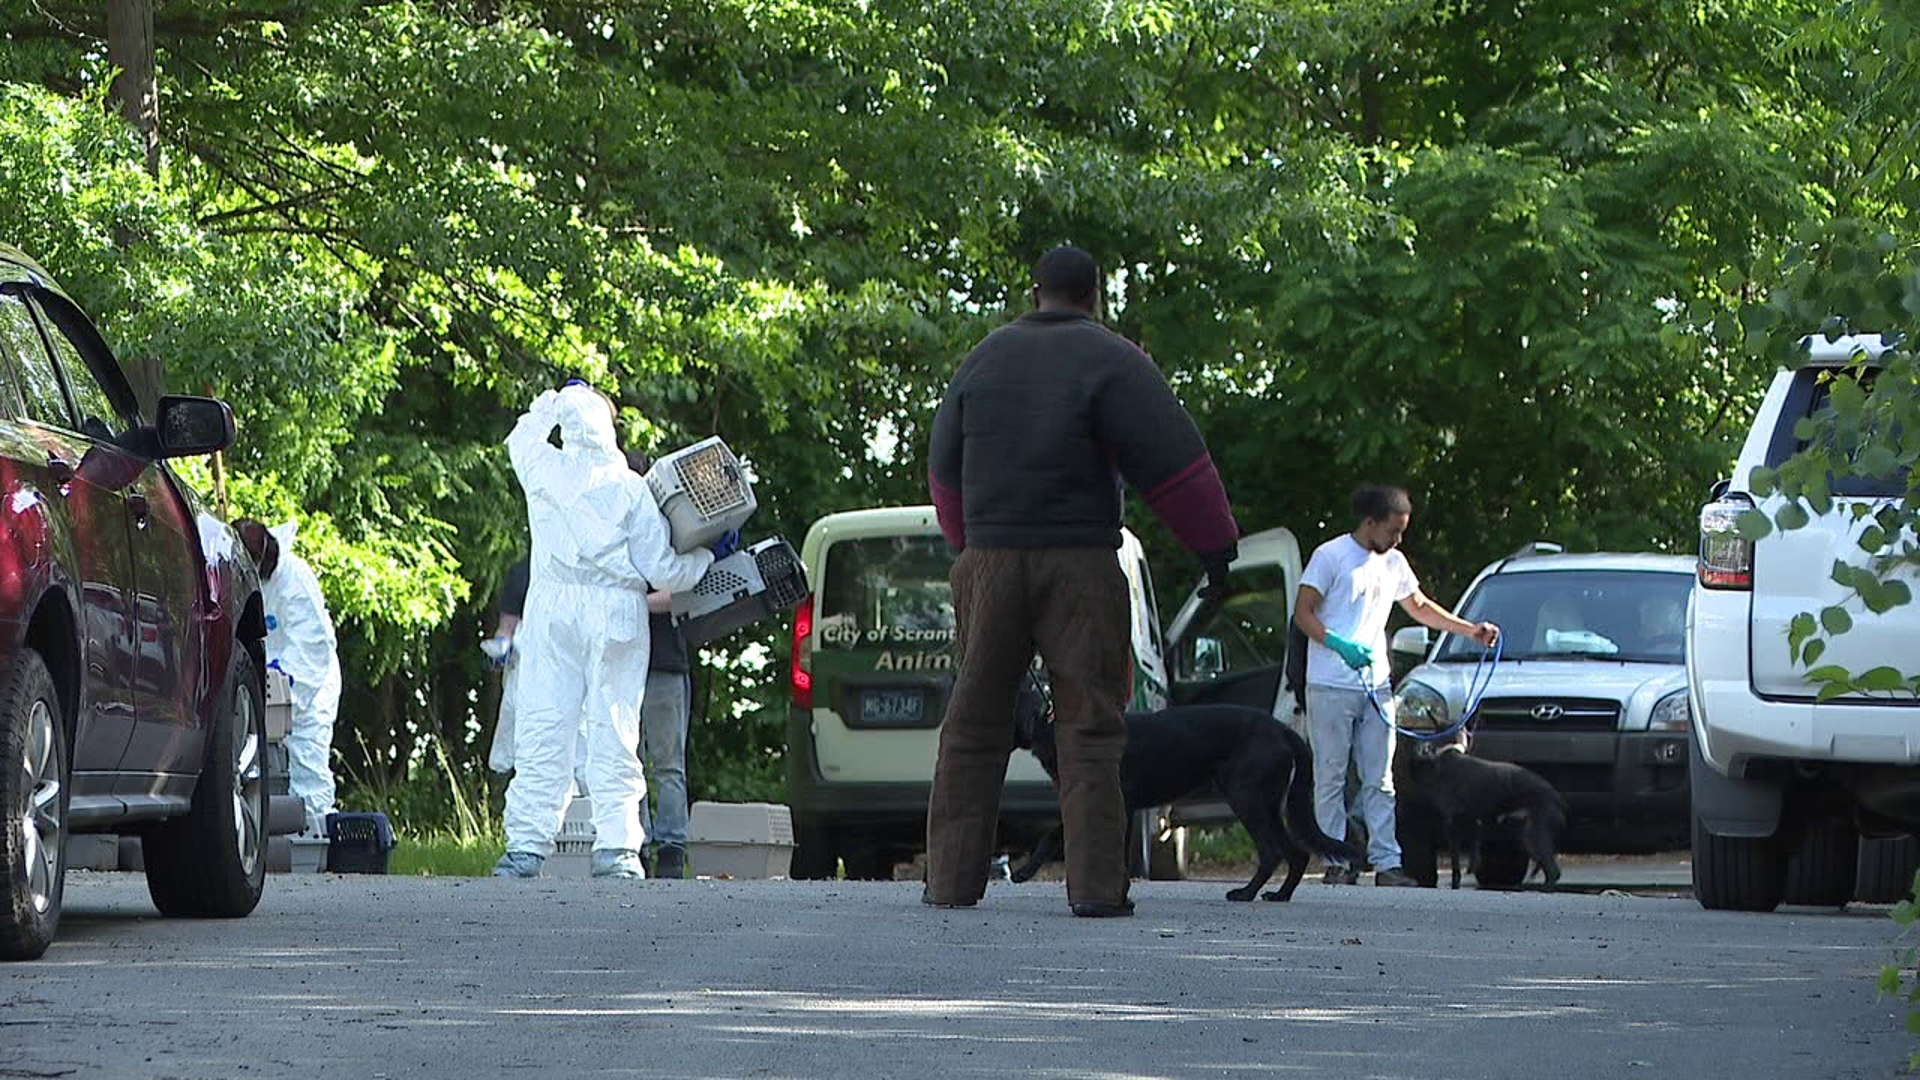 One person was arrested after dozens of animals were found inside a home in Scranton.